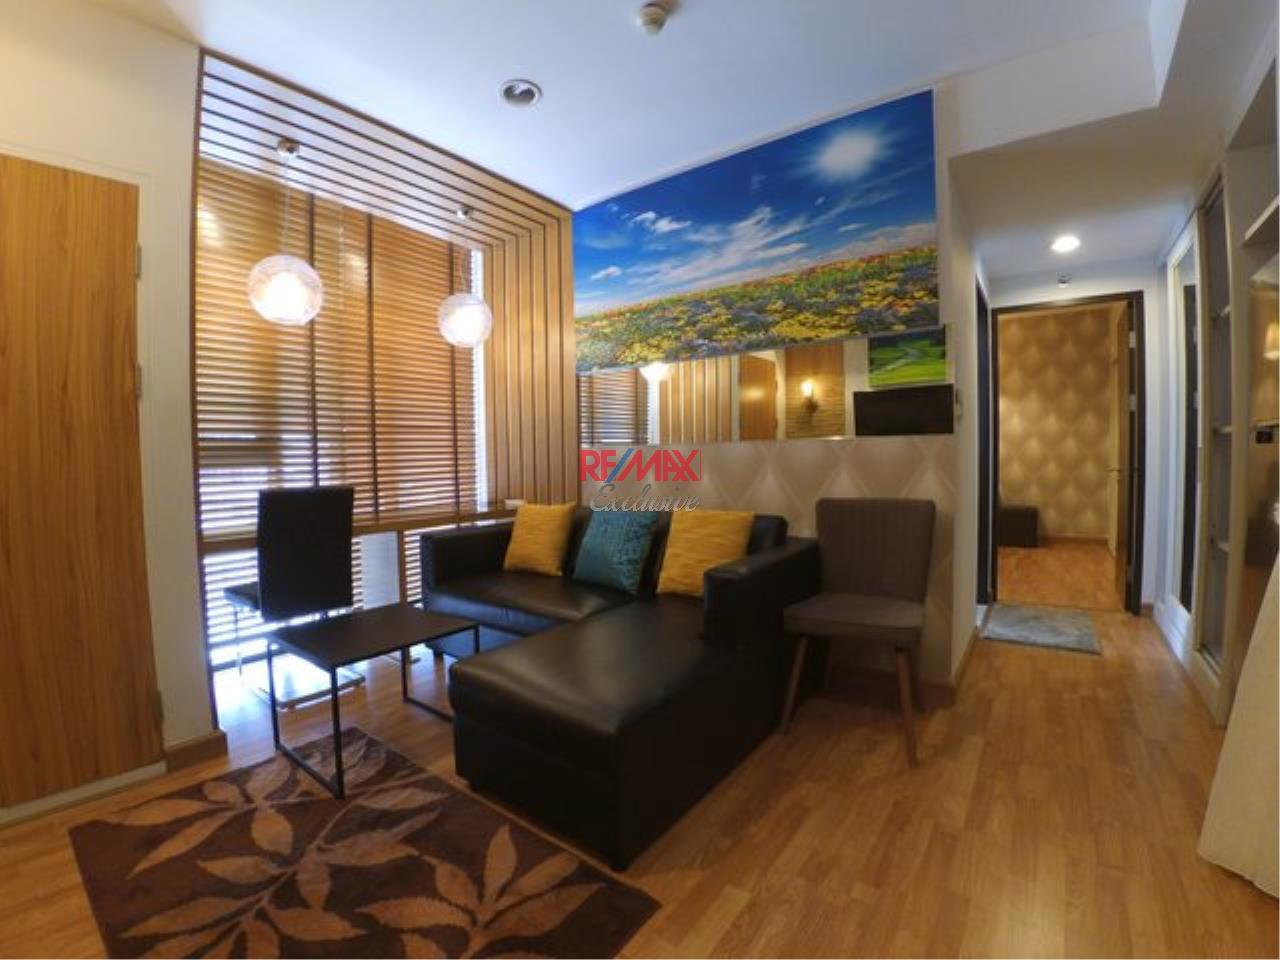 RE/MAX Exclusive Agency's THE ALCOVE, Thonglor 10, 44 Sqm., 1 Bedroom, Fully-Furnished, Fully Equipped Kitchen For RENT !!!! 12